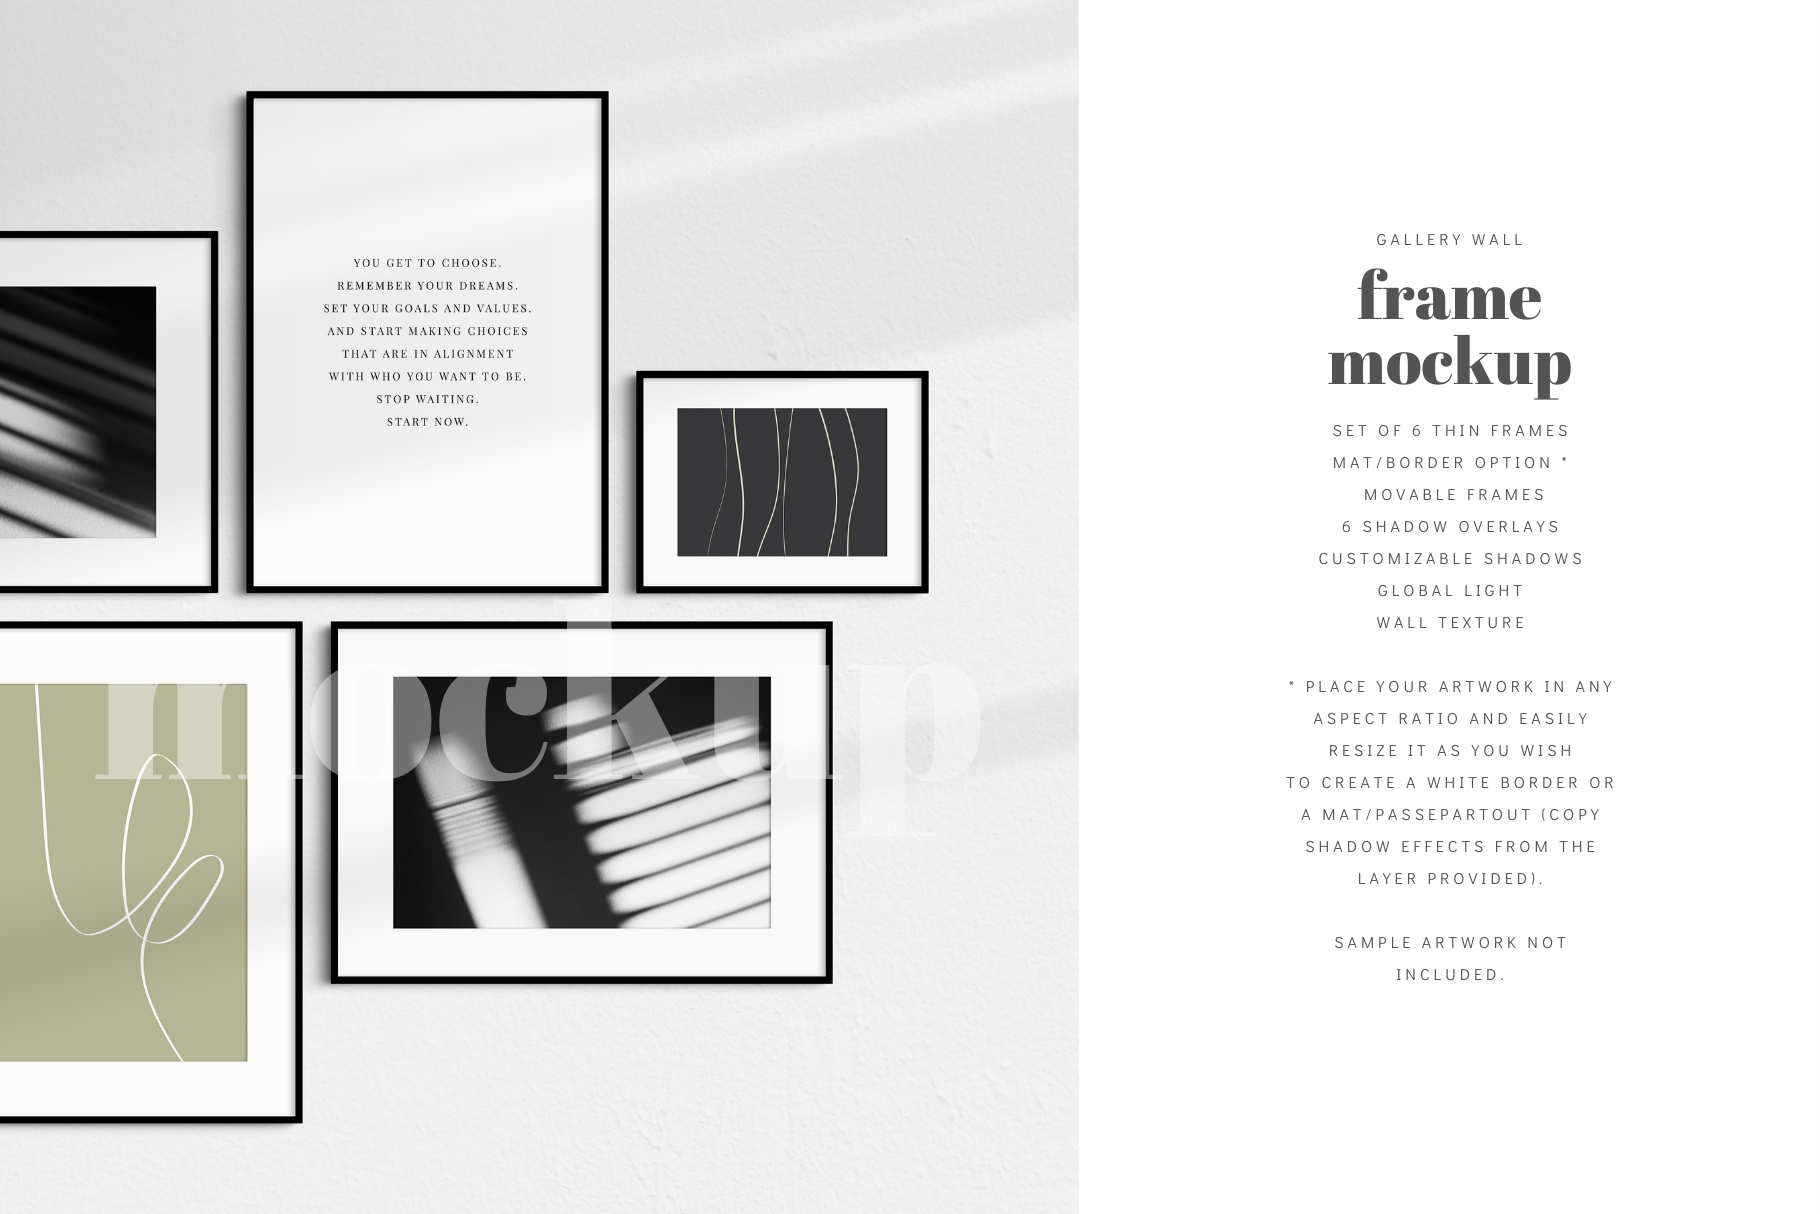 Showcase your artwork in an elegant, modern way with this customizable and easy-to-use minimalist gallery wall frame mockup that features a set of 6 thin black frames.